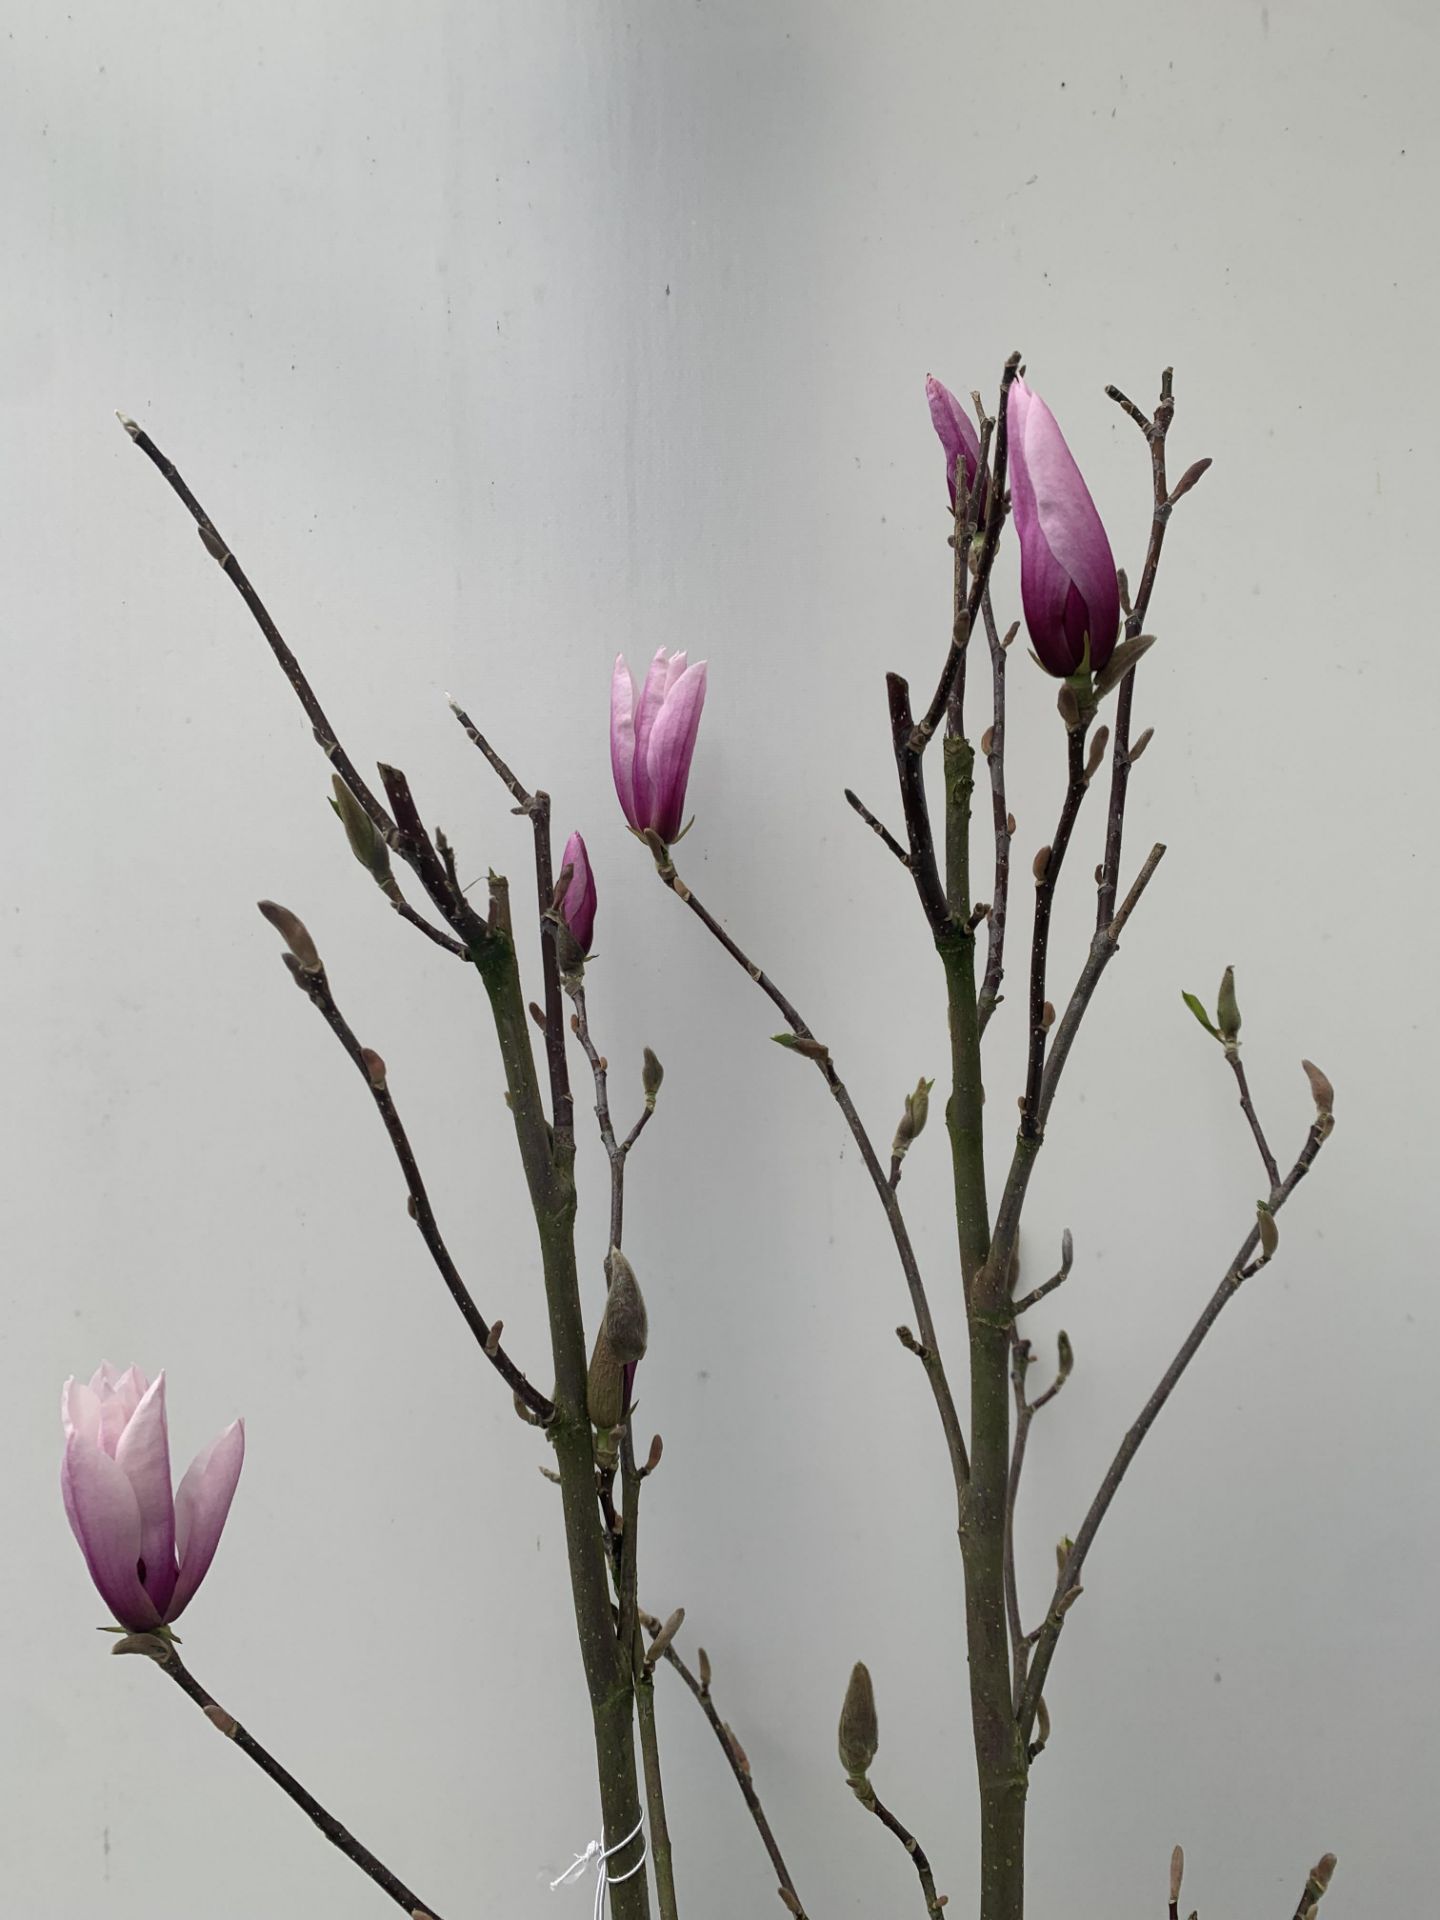 ONE MAGNOLIA PINK 'BETTY' APPROX 120CM IN HEIGHT IN 7 LTR POT PLUS VAT - Image 3 of 12